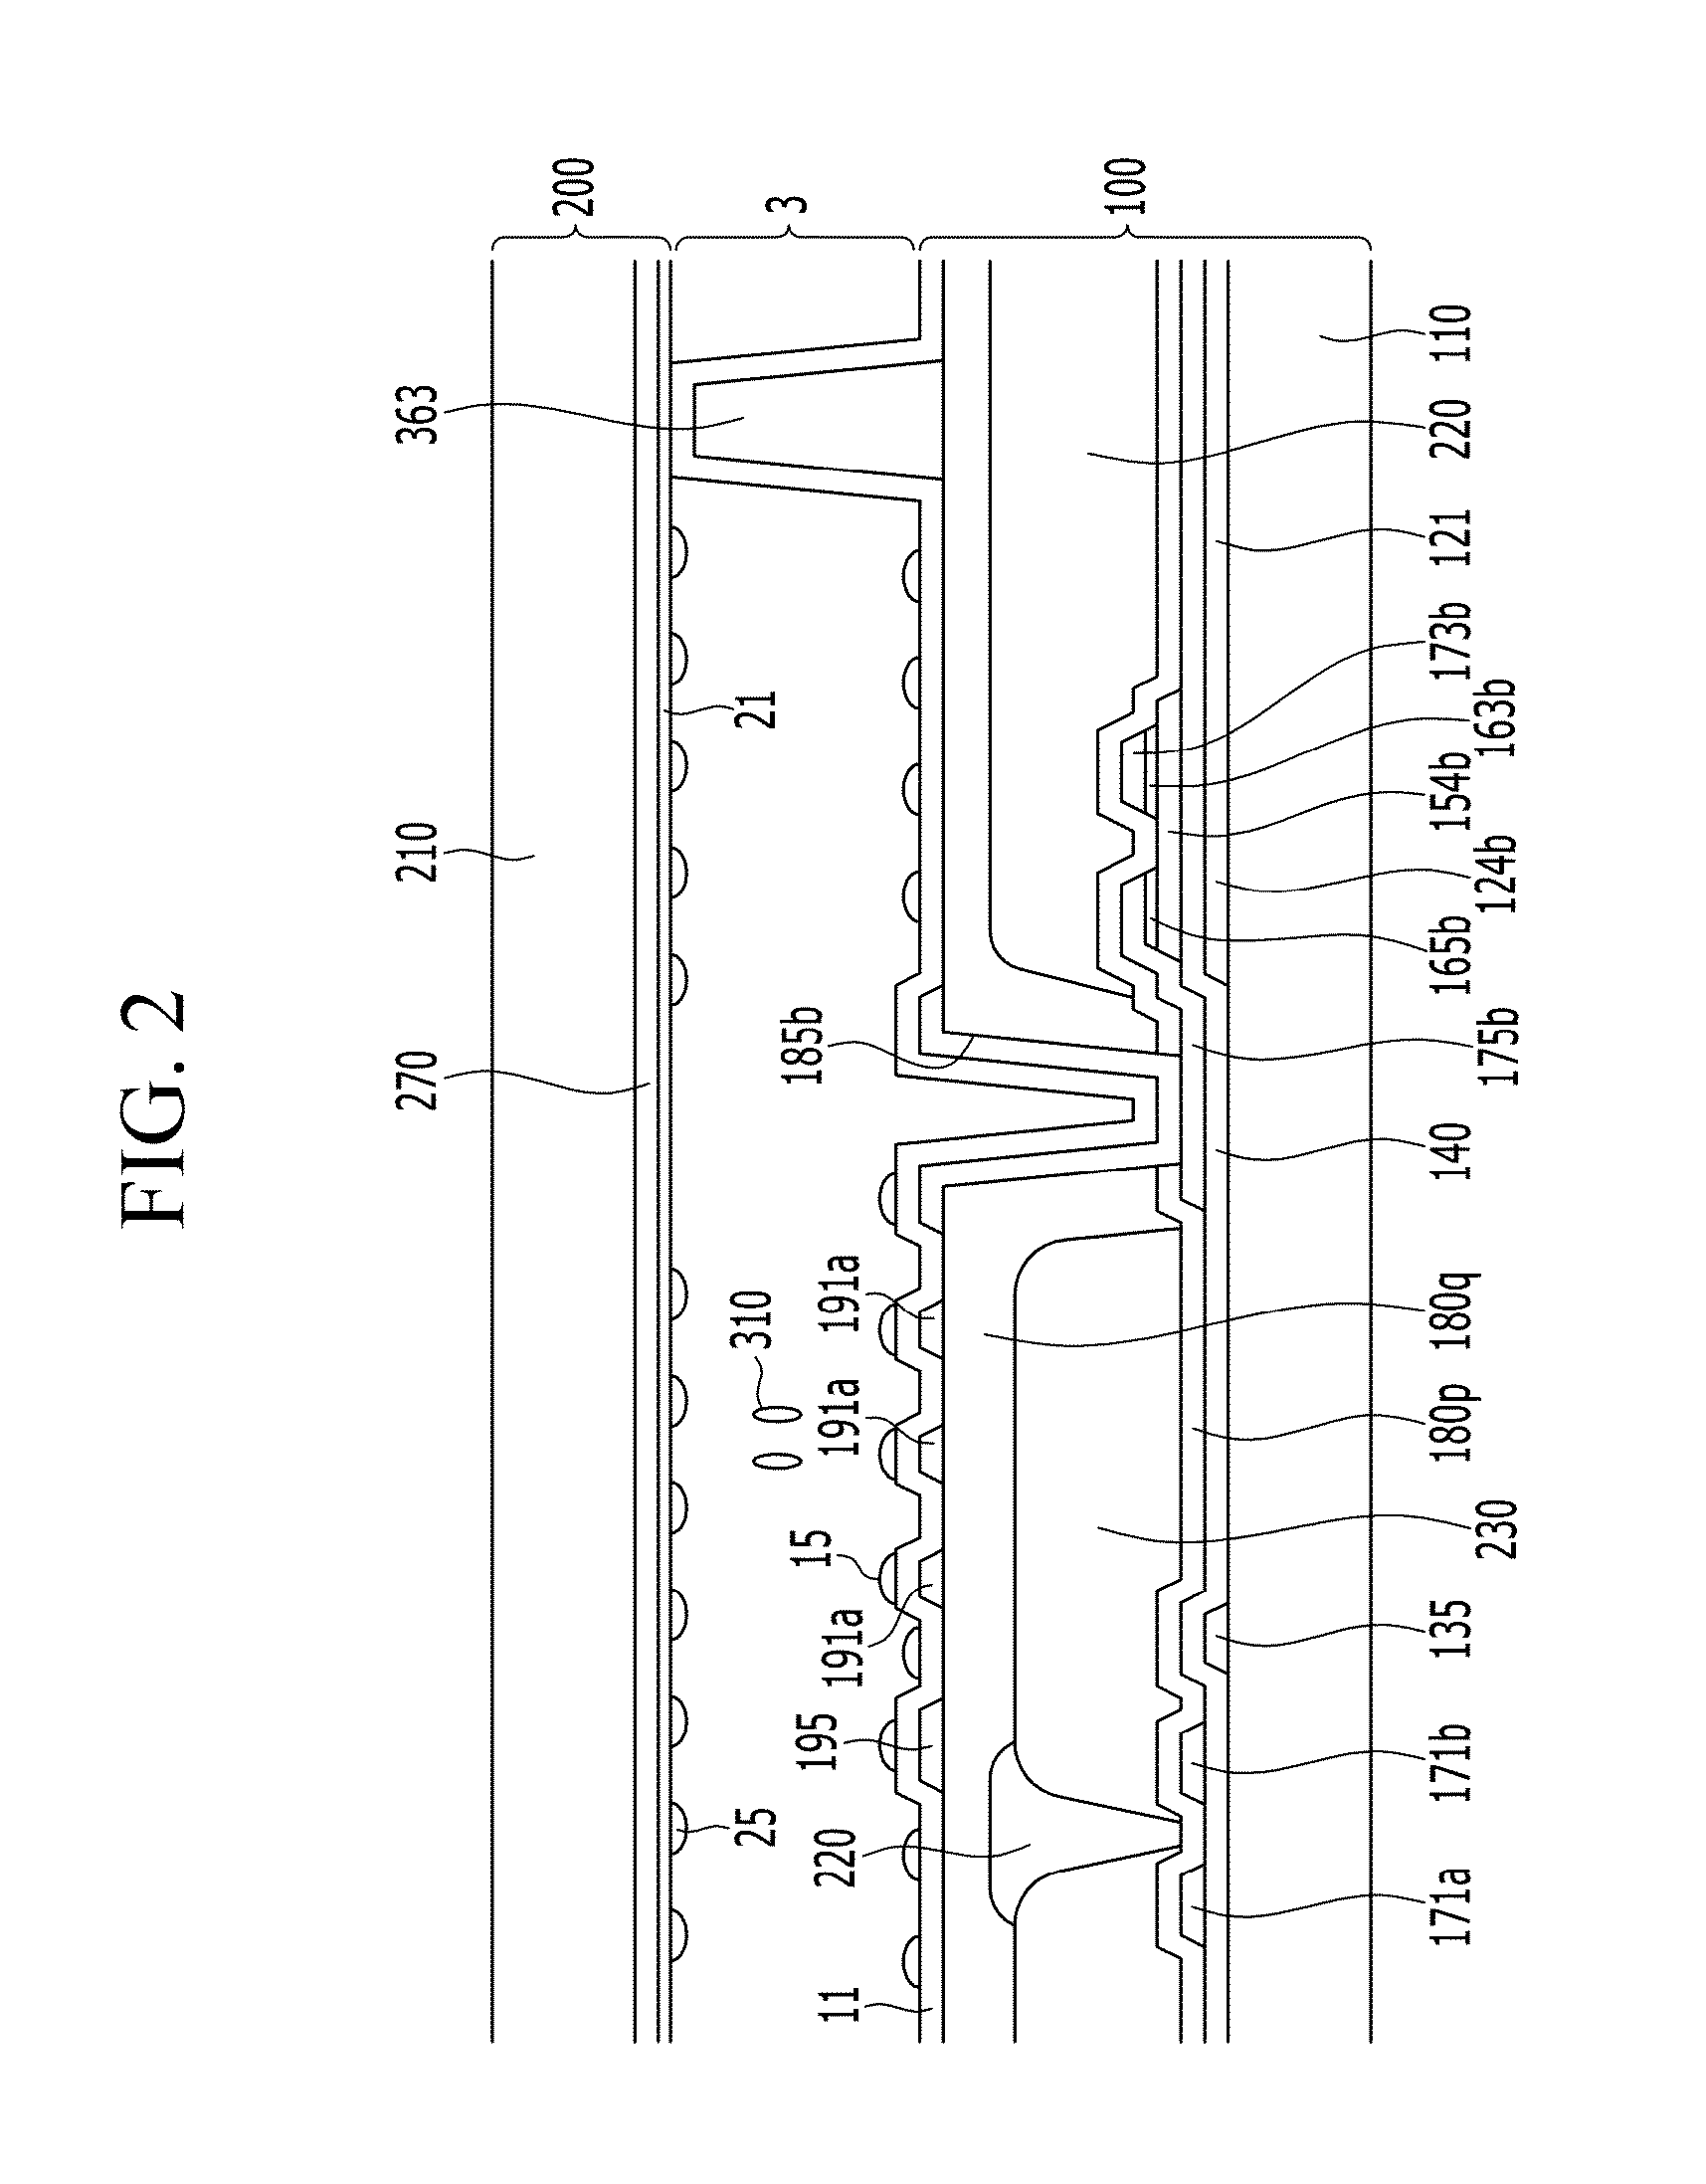 Curved liquid crystal display and method of manufacturing the same